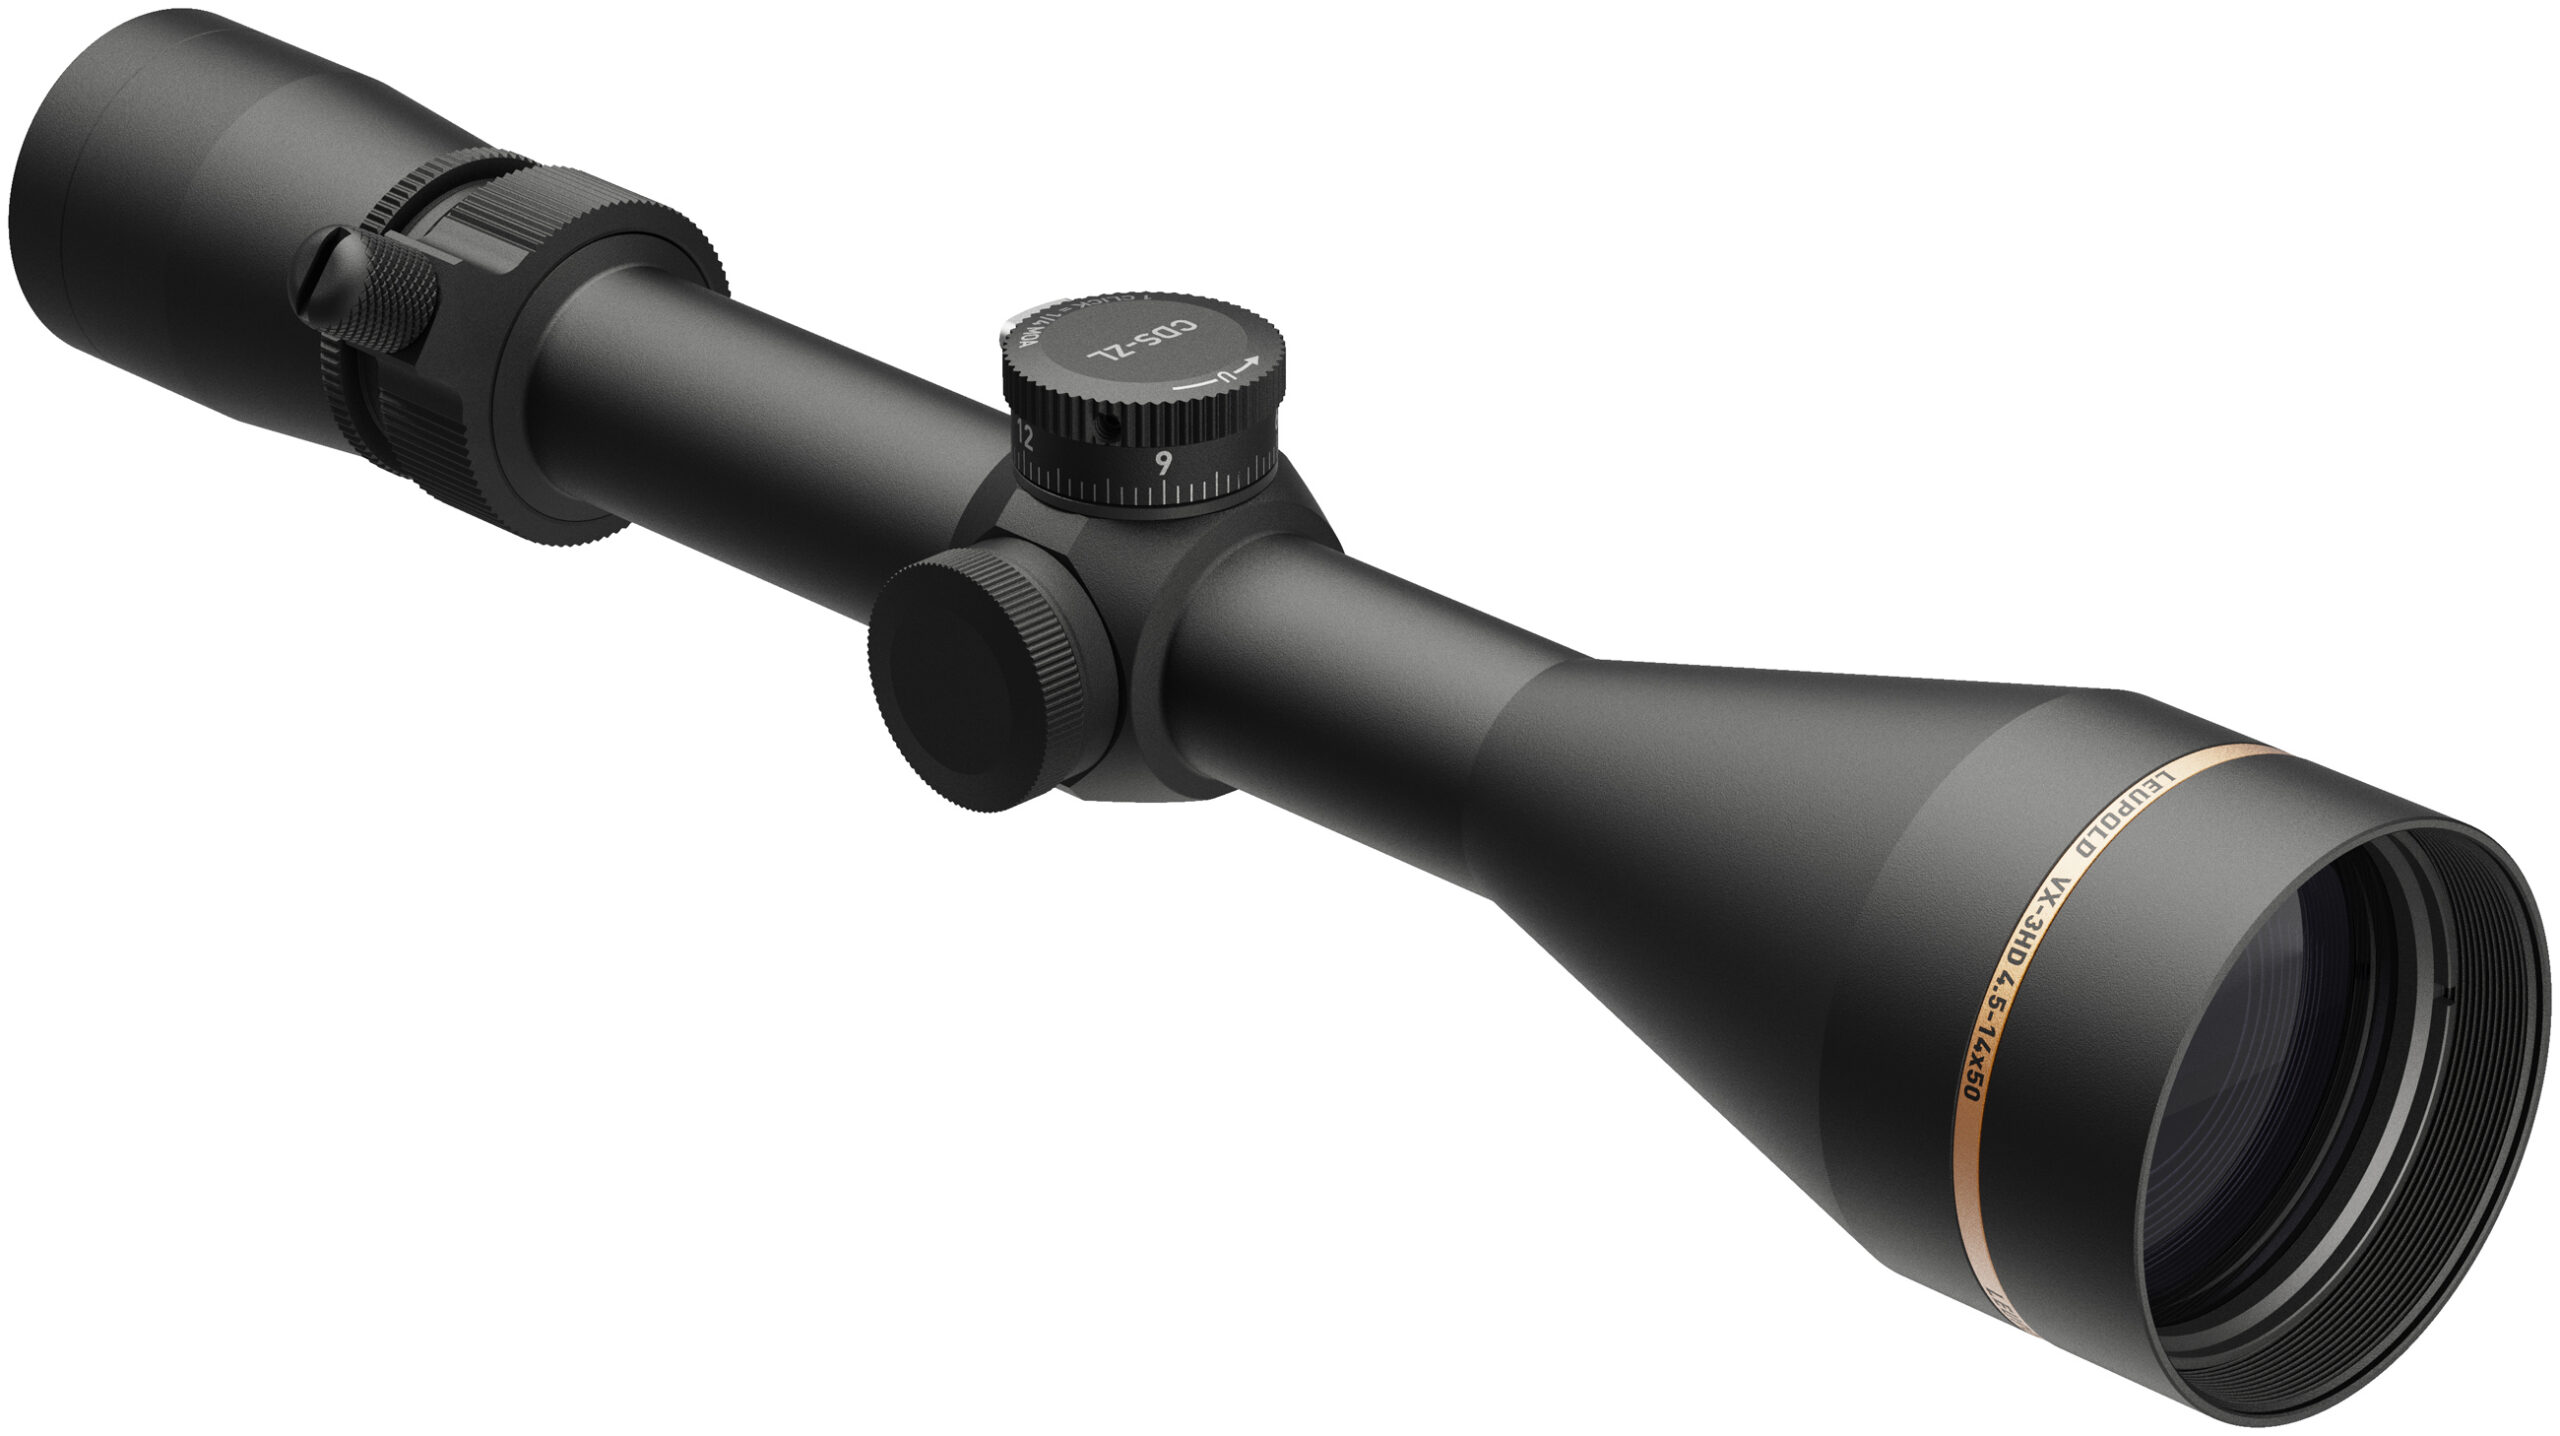 The new Leupold VX-3HD riflescope is replacing the VX-3i scope.